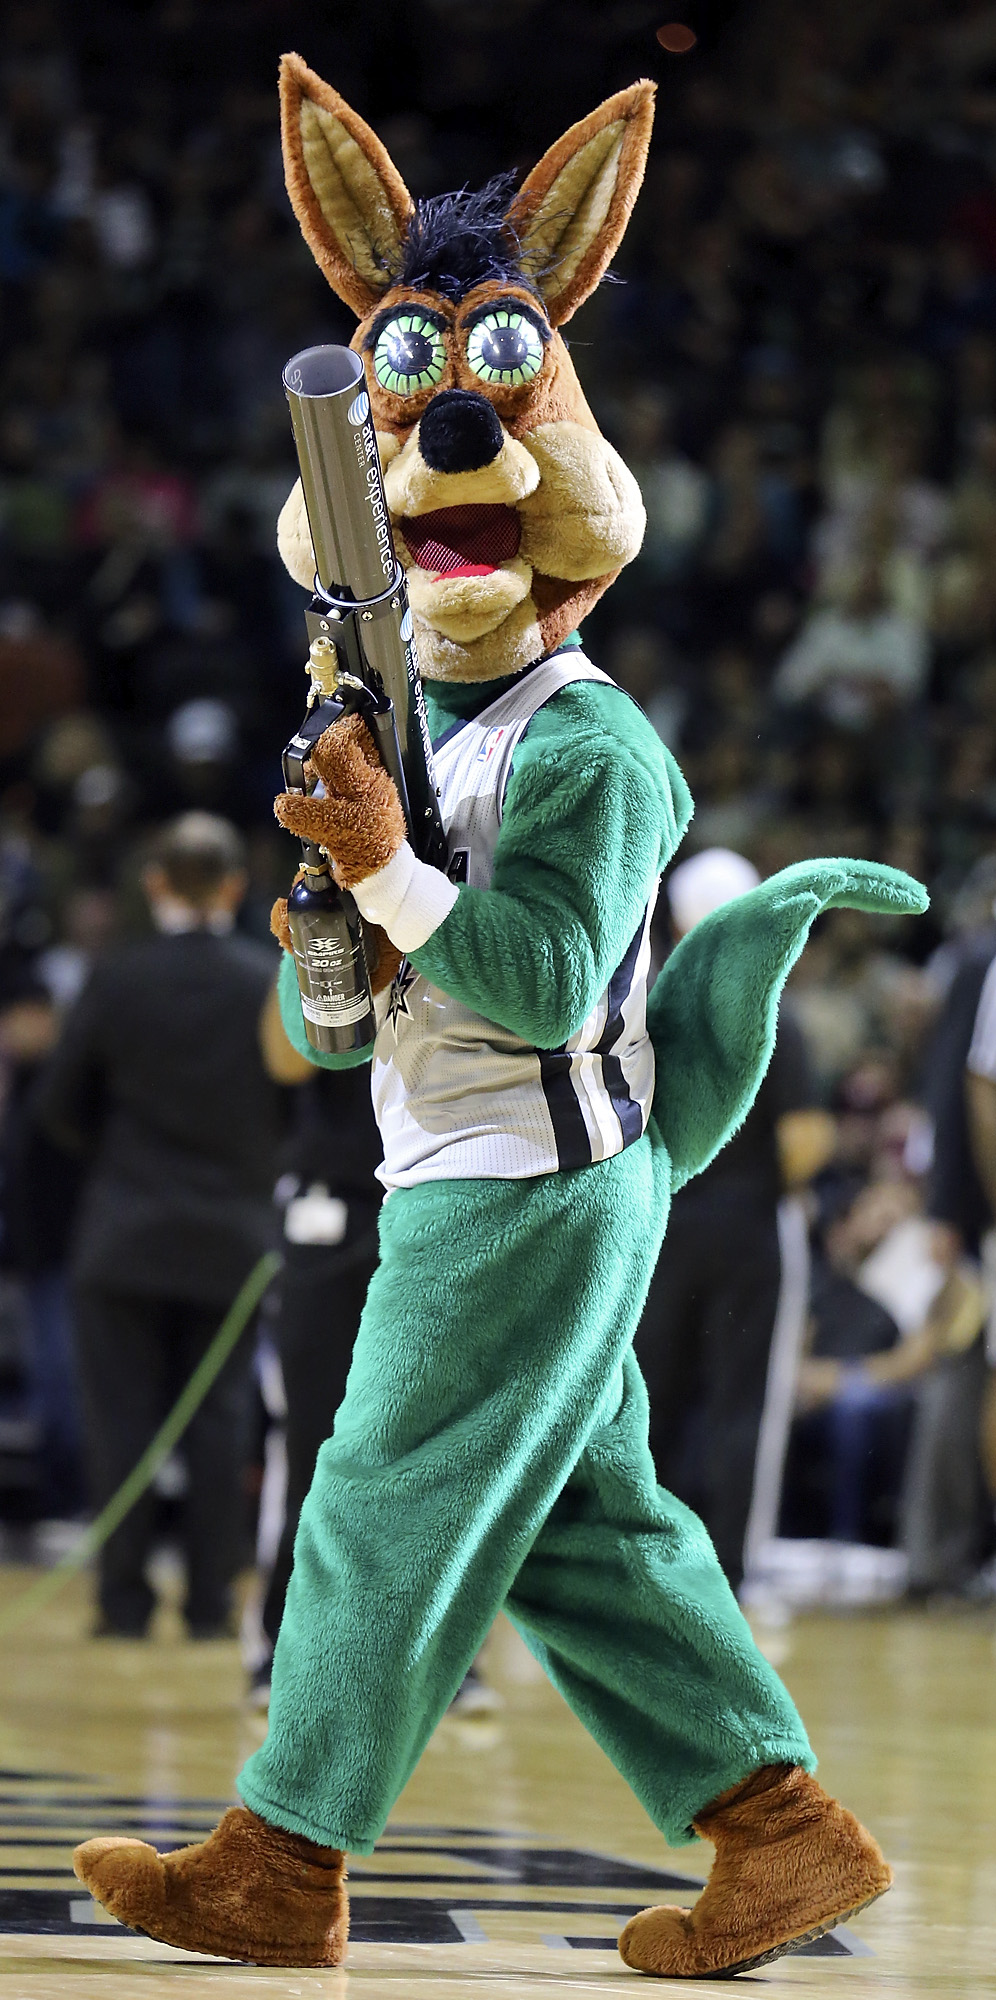 Inside Coyote's Den: Exclusive behind-the-scenes look at Spurs iconic mascot